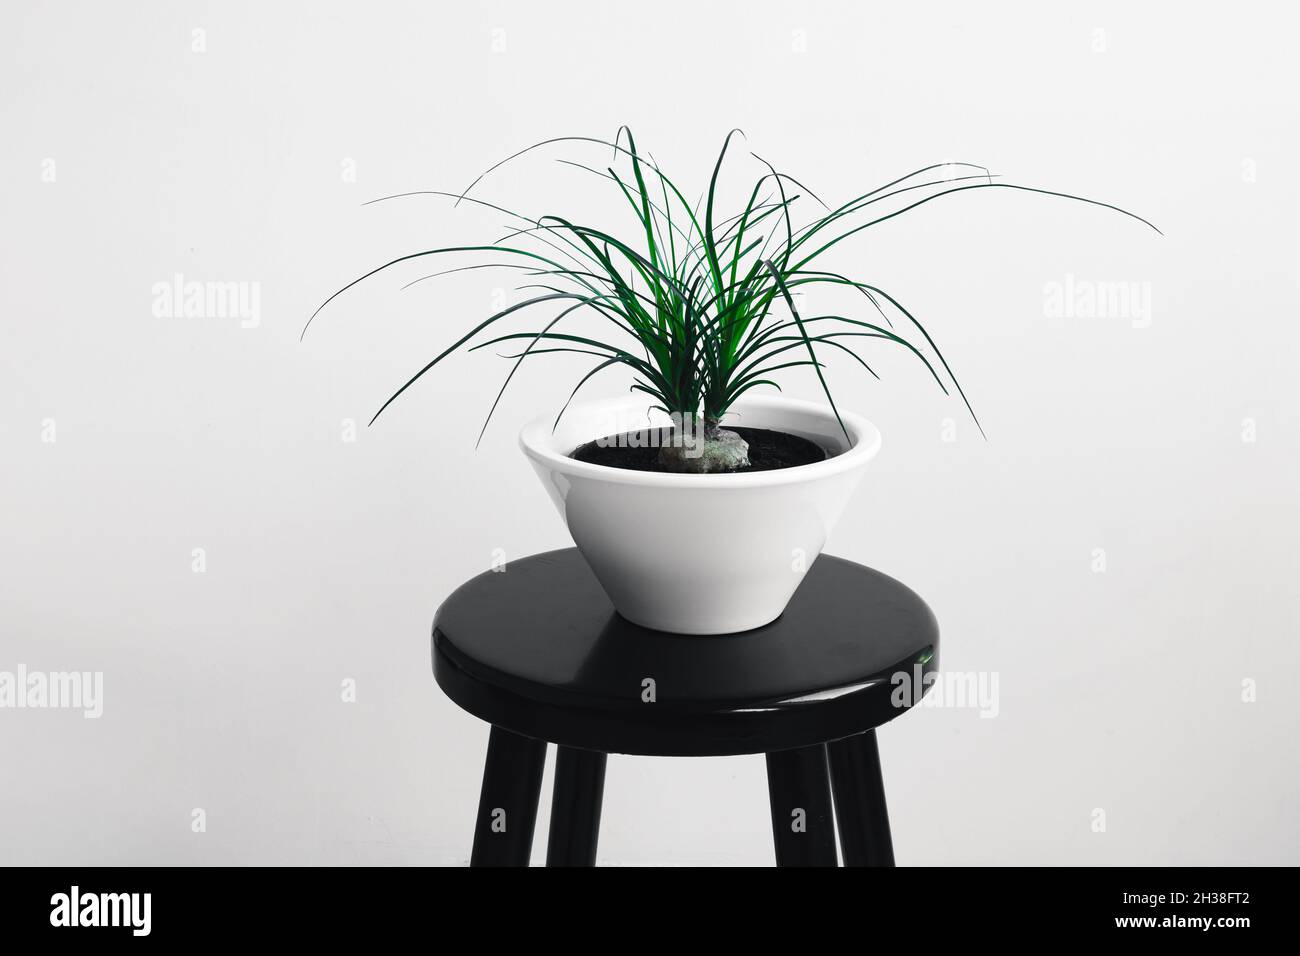 Plant of beaucarnea recurvata in a white flower pot on the black table in daylight Stock Photo